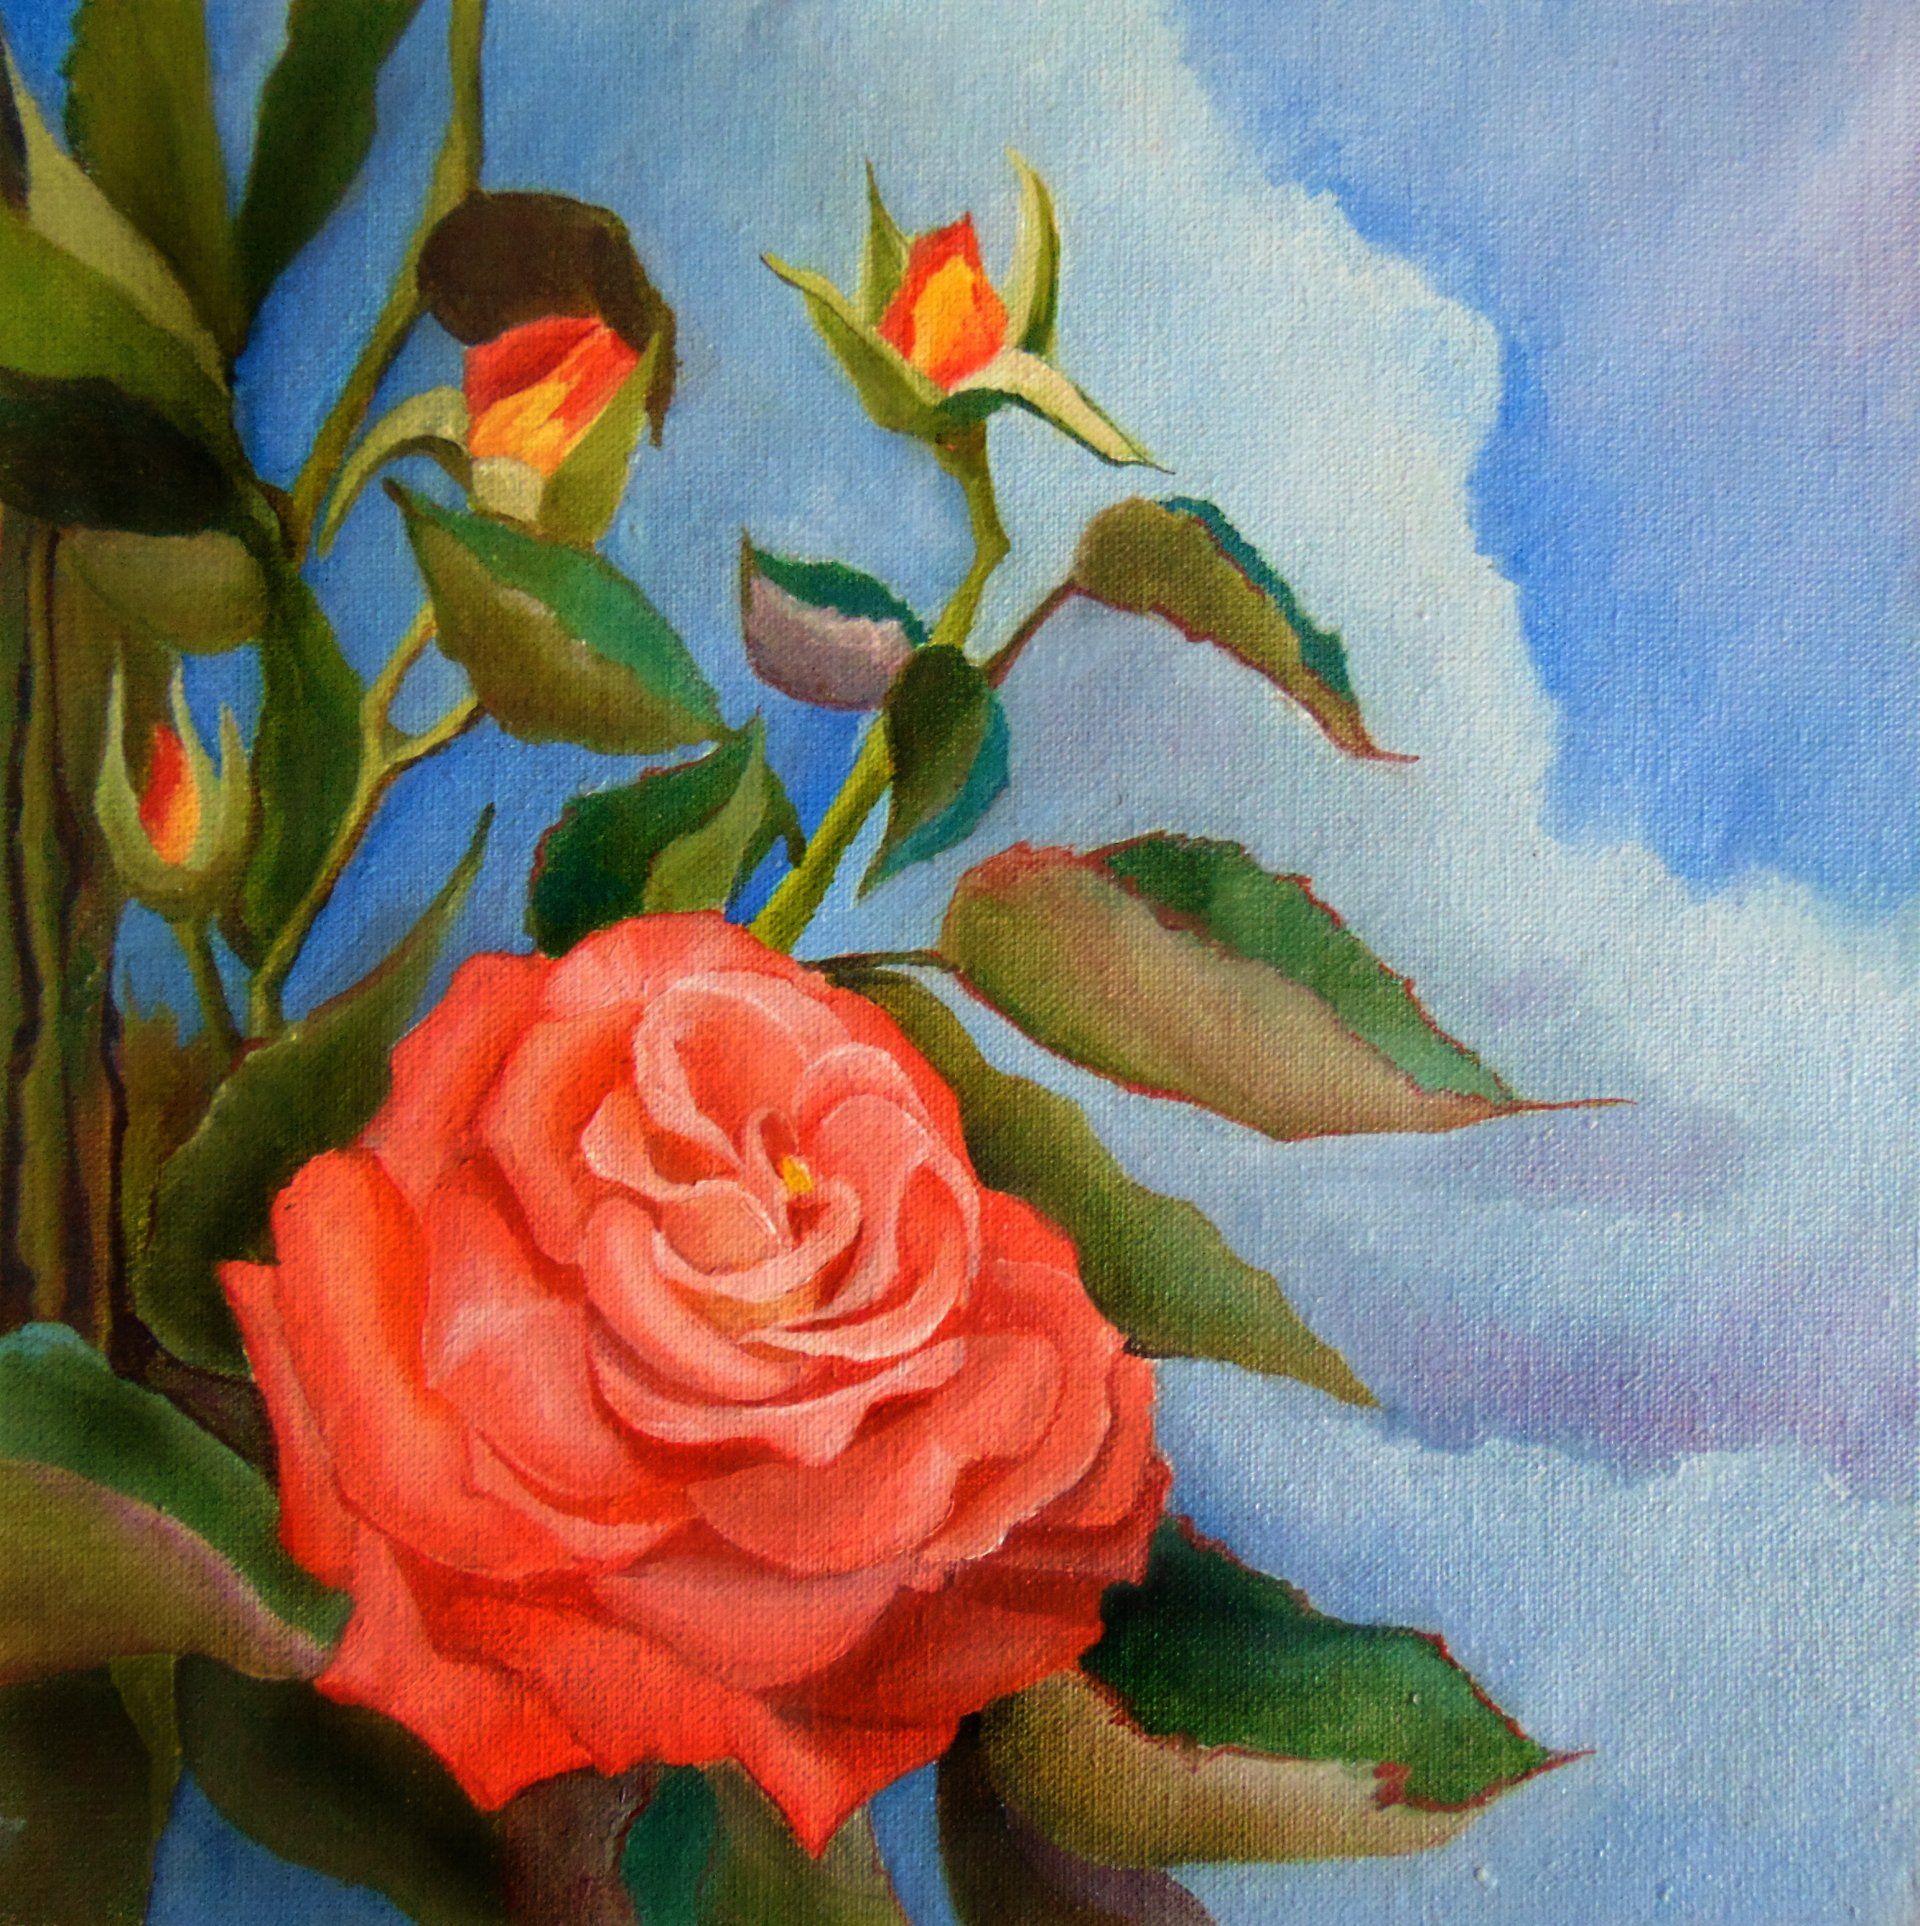 water color painting of a pink-orange rose and rosebuds against a blue sky with clouds